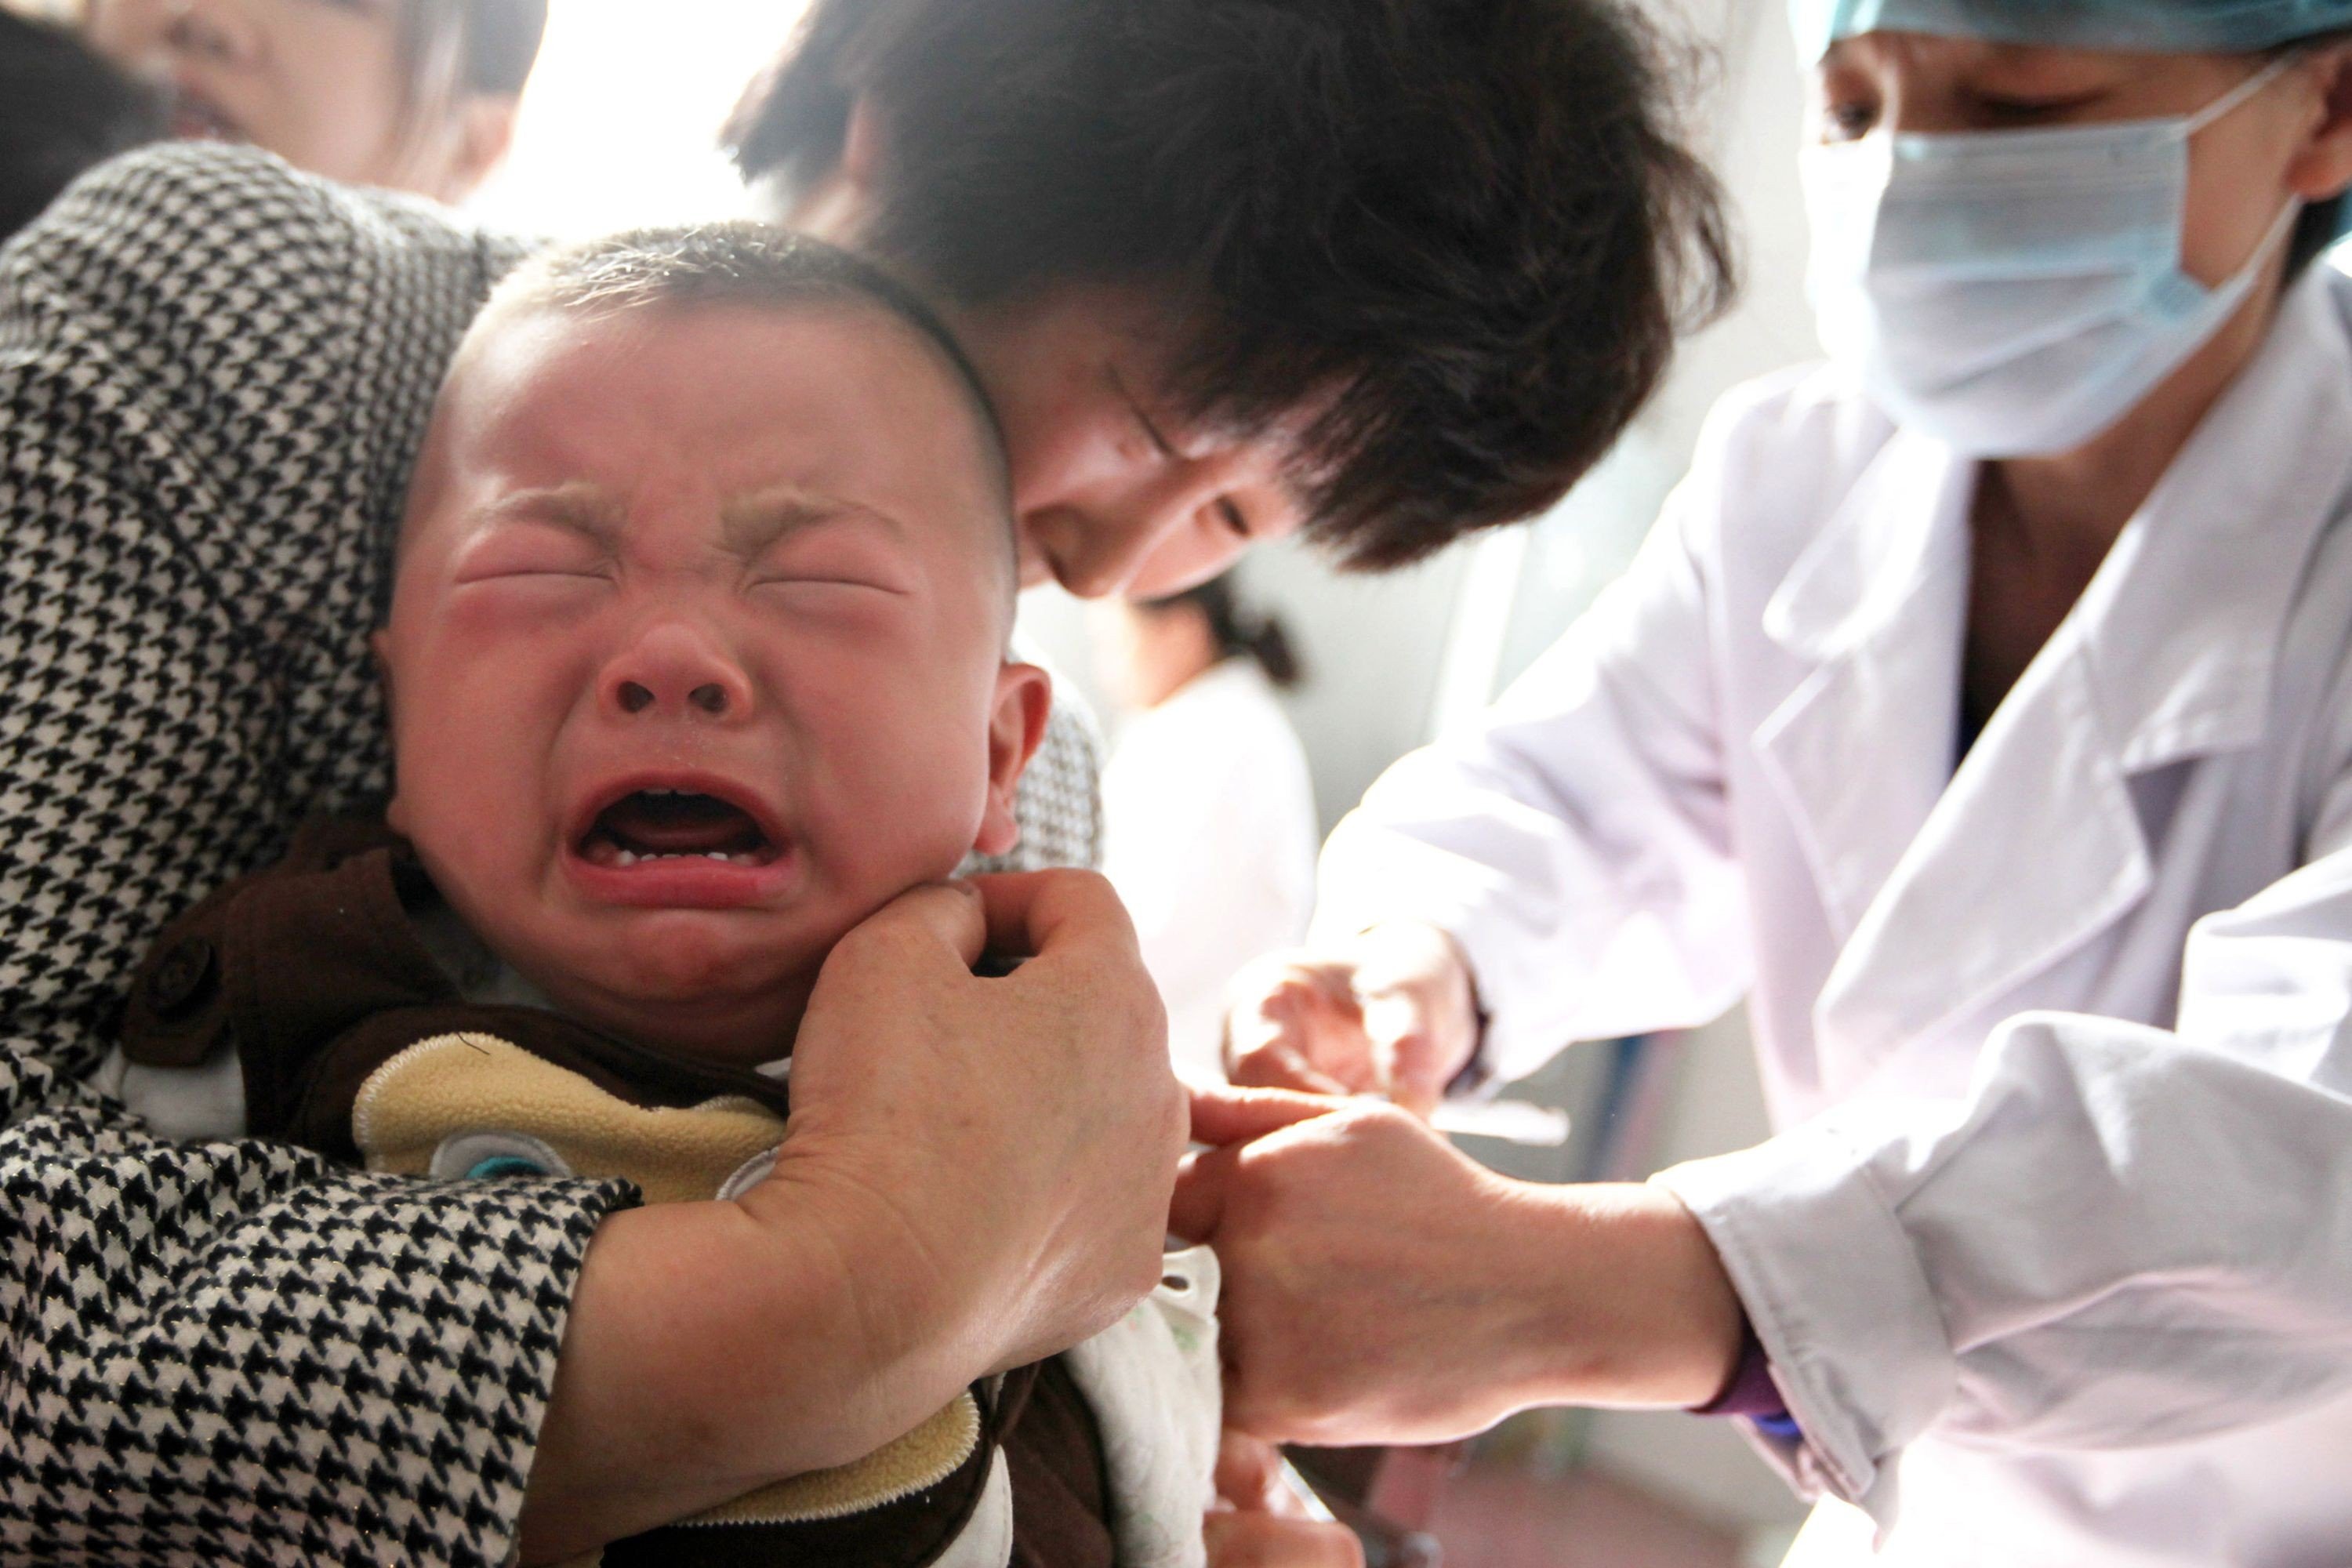 A child receives a vaccination shot at a hospital in Huaibei in China's eastern Anhui province. Photo: AFP